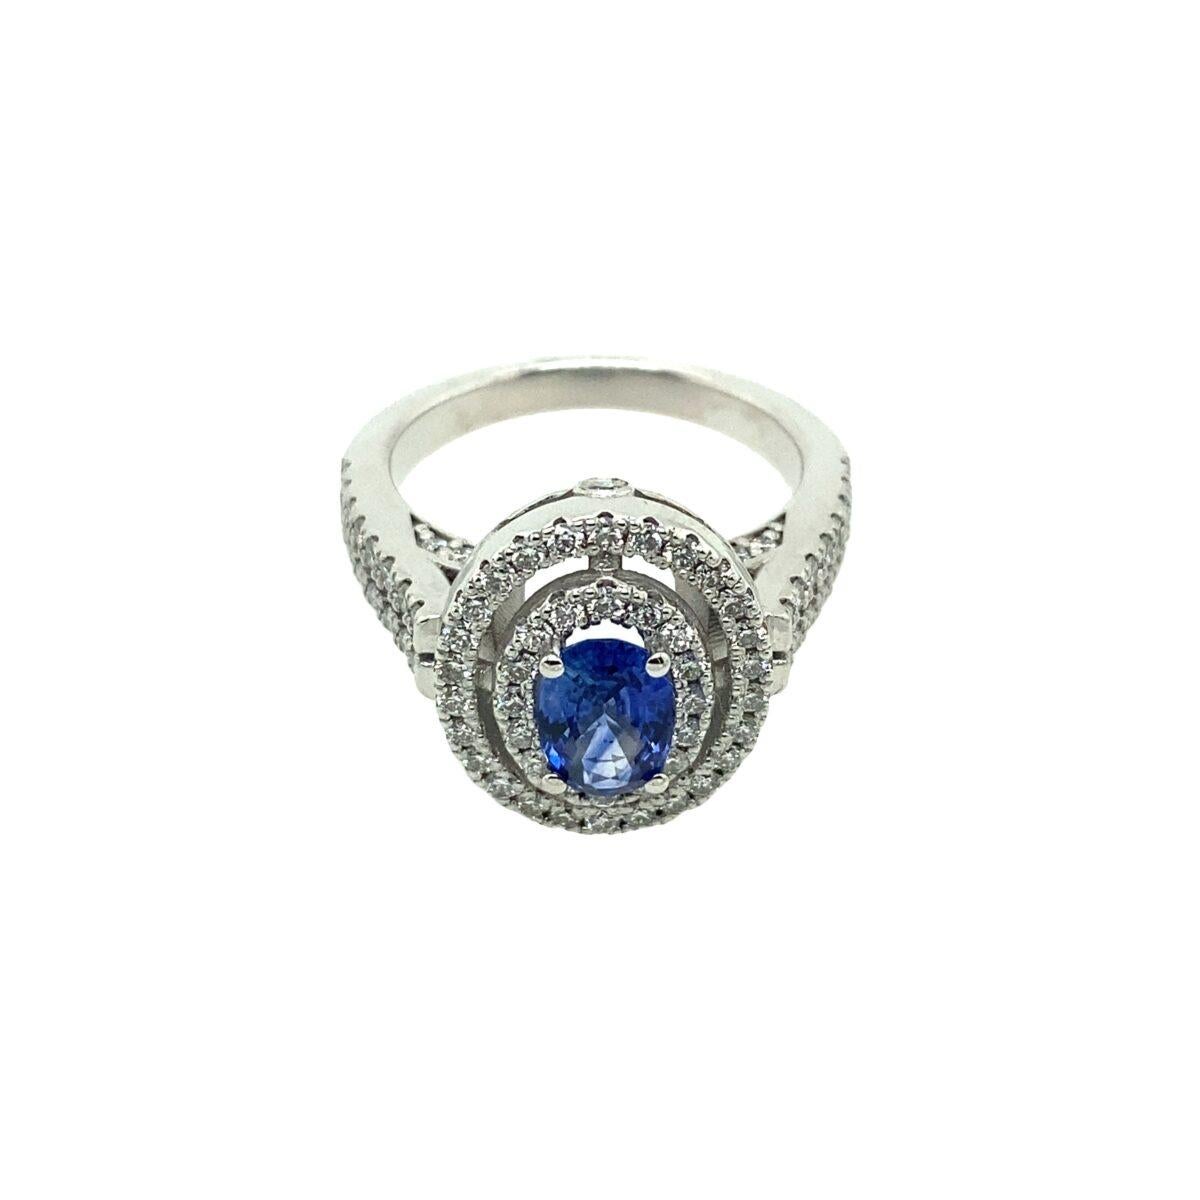 New 1.04ct Certified Natural Ceylon Sapphire Ring, Surrounded by 0.87ct Diamonds

Additional Information:
Set in 18ct White Gold
Total Diamond Weight: 0.87ct
Diamond Colour: F
Diamond Clarity: VS
Total  Weight: 9.7g
Ring Size: M1/2 (can be